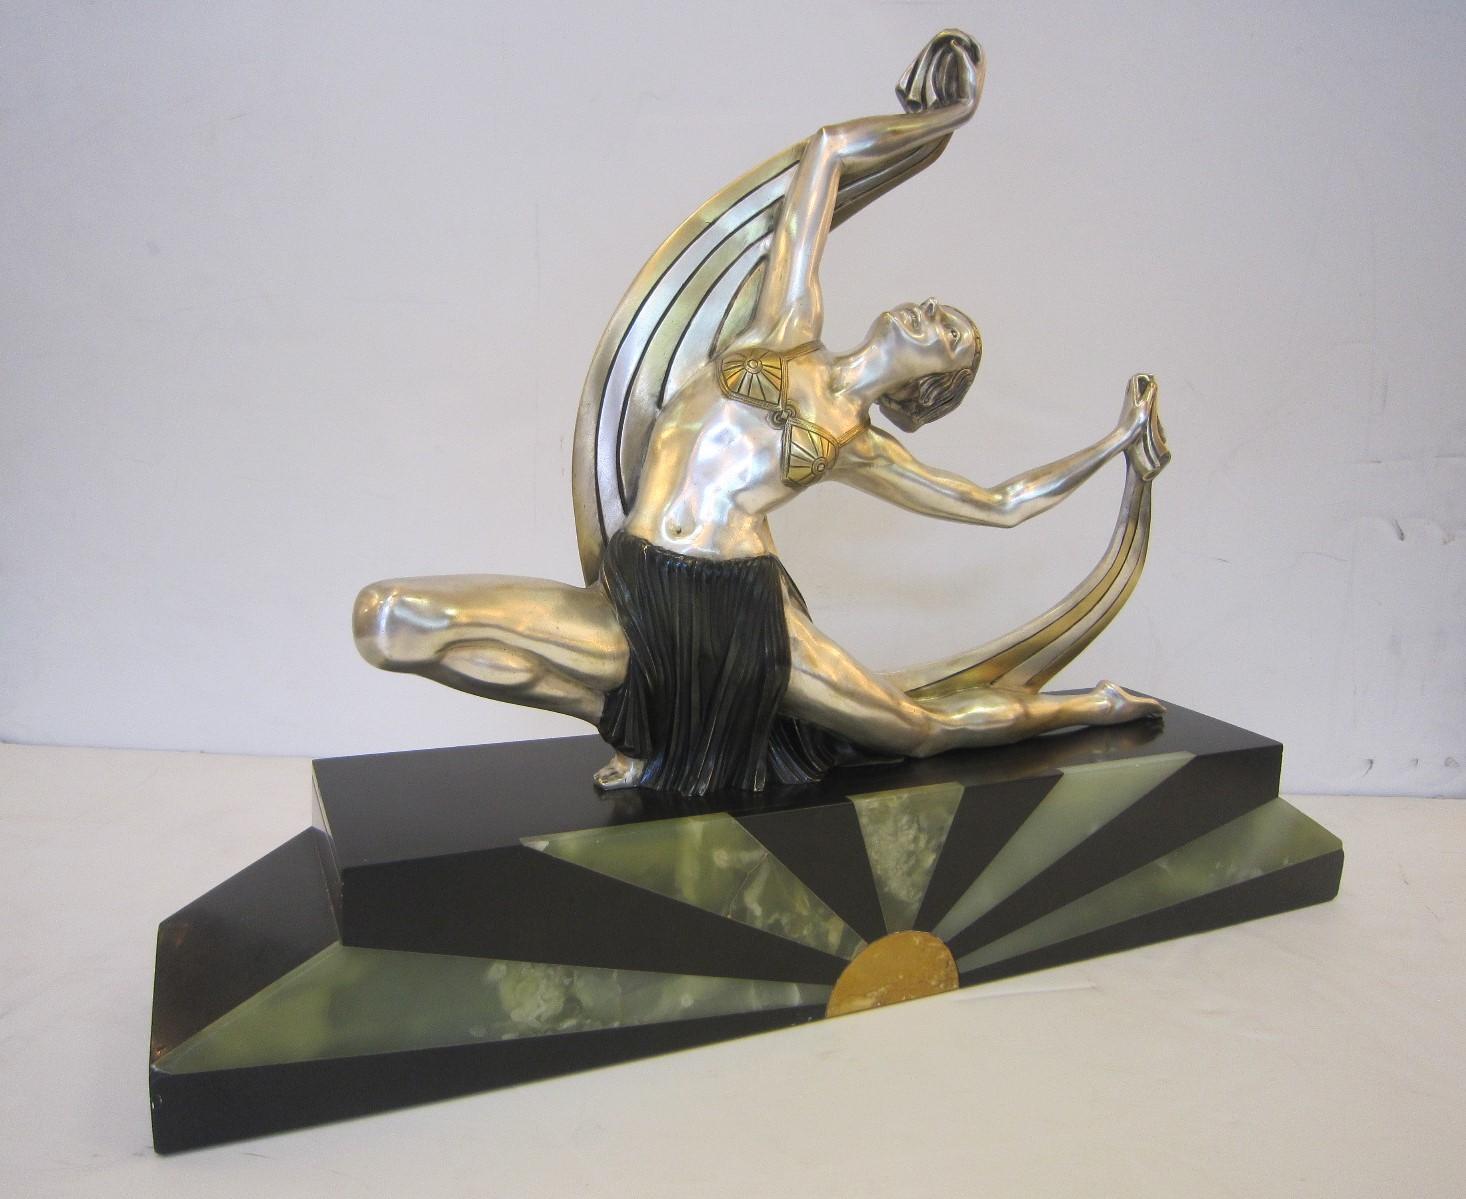 An important French Art Deco parcel-gilt, nickel and polychromed bronze sculpture of a female dancer by J. Lormier.
The figure wearing a bra-like bodice and pleated skirt is portrayed as a dancer, kneeling with graceful scarf overhead in the style